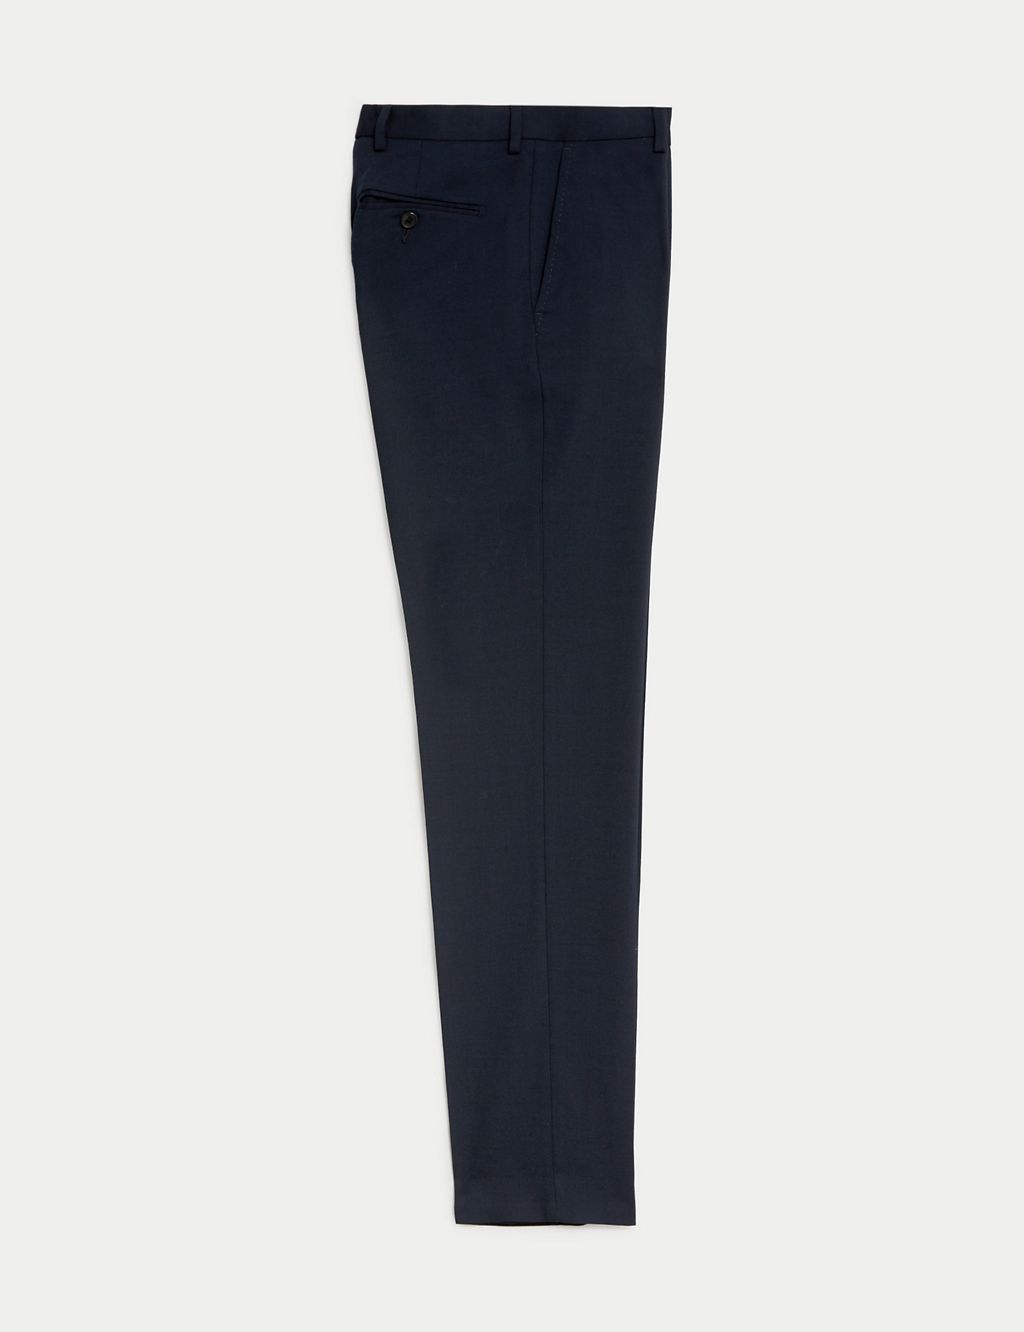 Wool Blend Flat Front Stretch Trousers 1 of 7